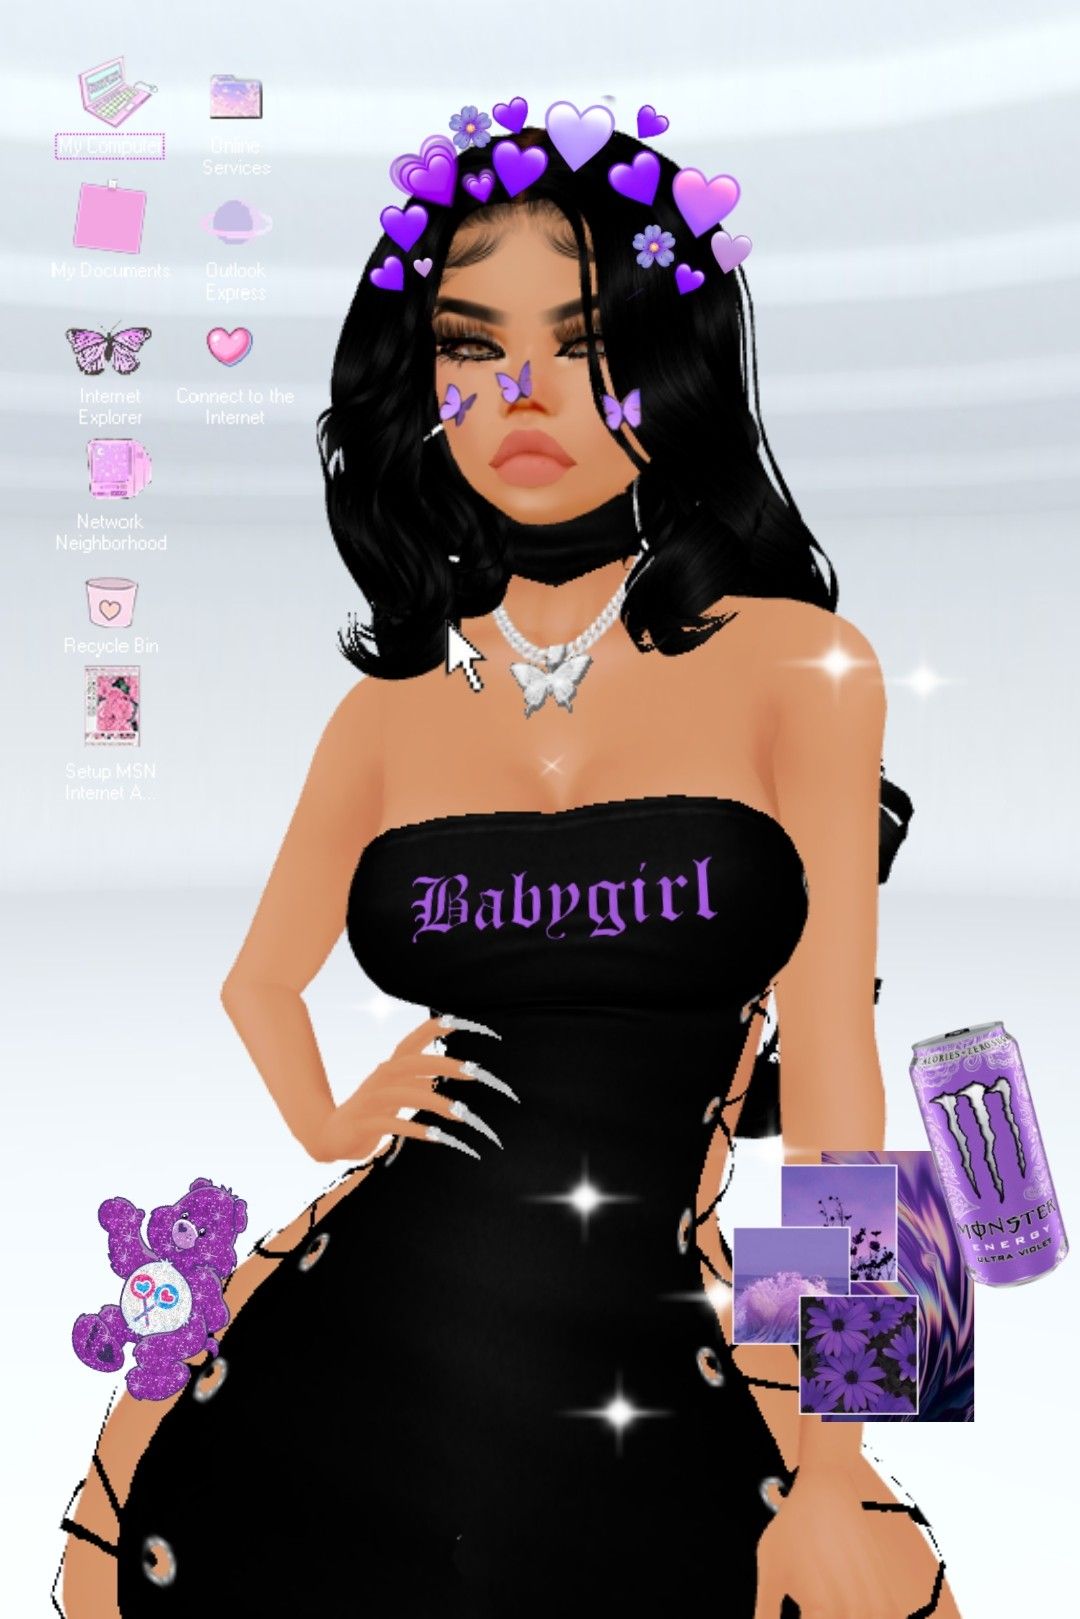 IMVU Outfits Wallpapers - Wallpaper Cave